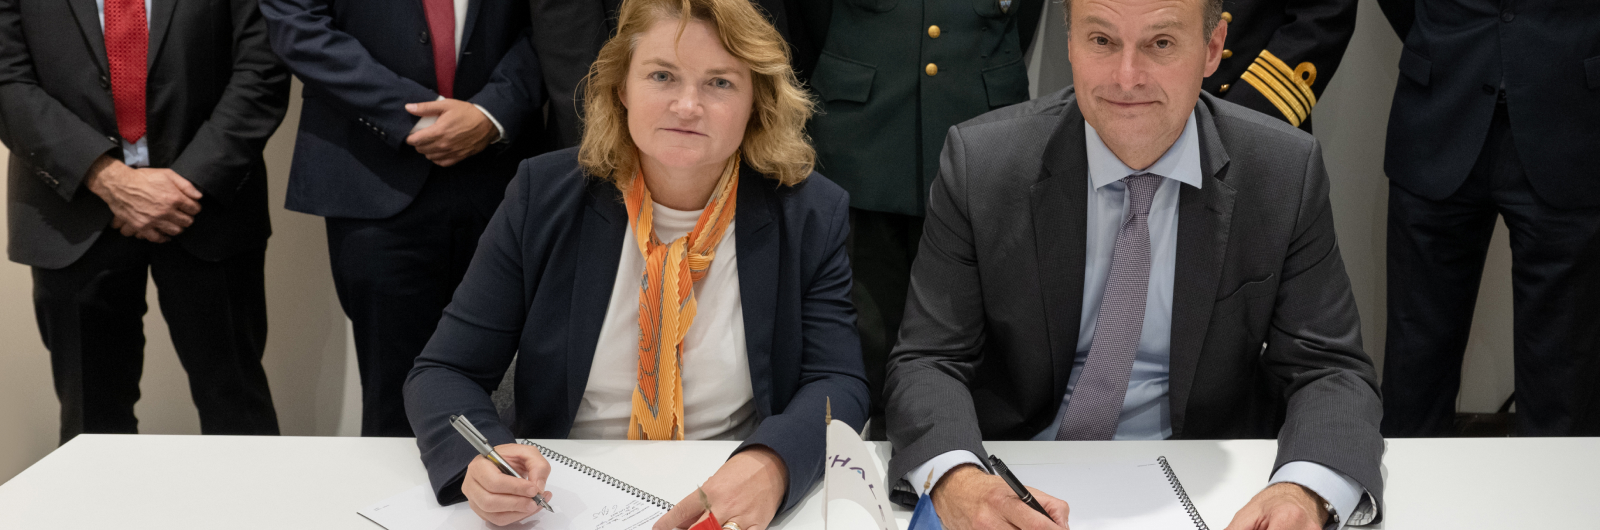 Thales and CUBEDIN sign a Memorandum of Understanding to develop the use of the CUBEDIN interface solution for Naval applications